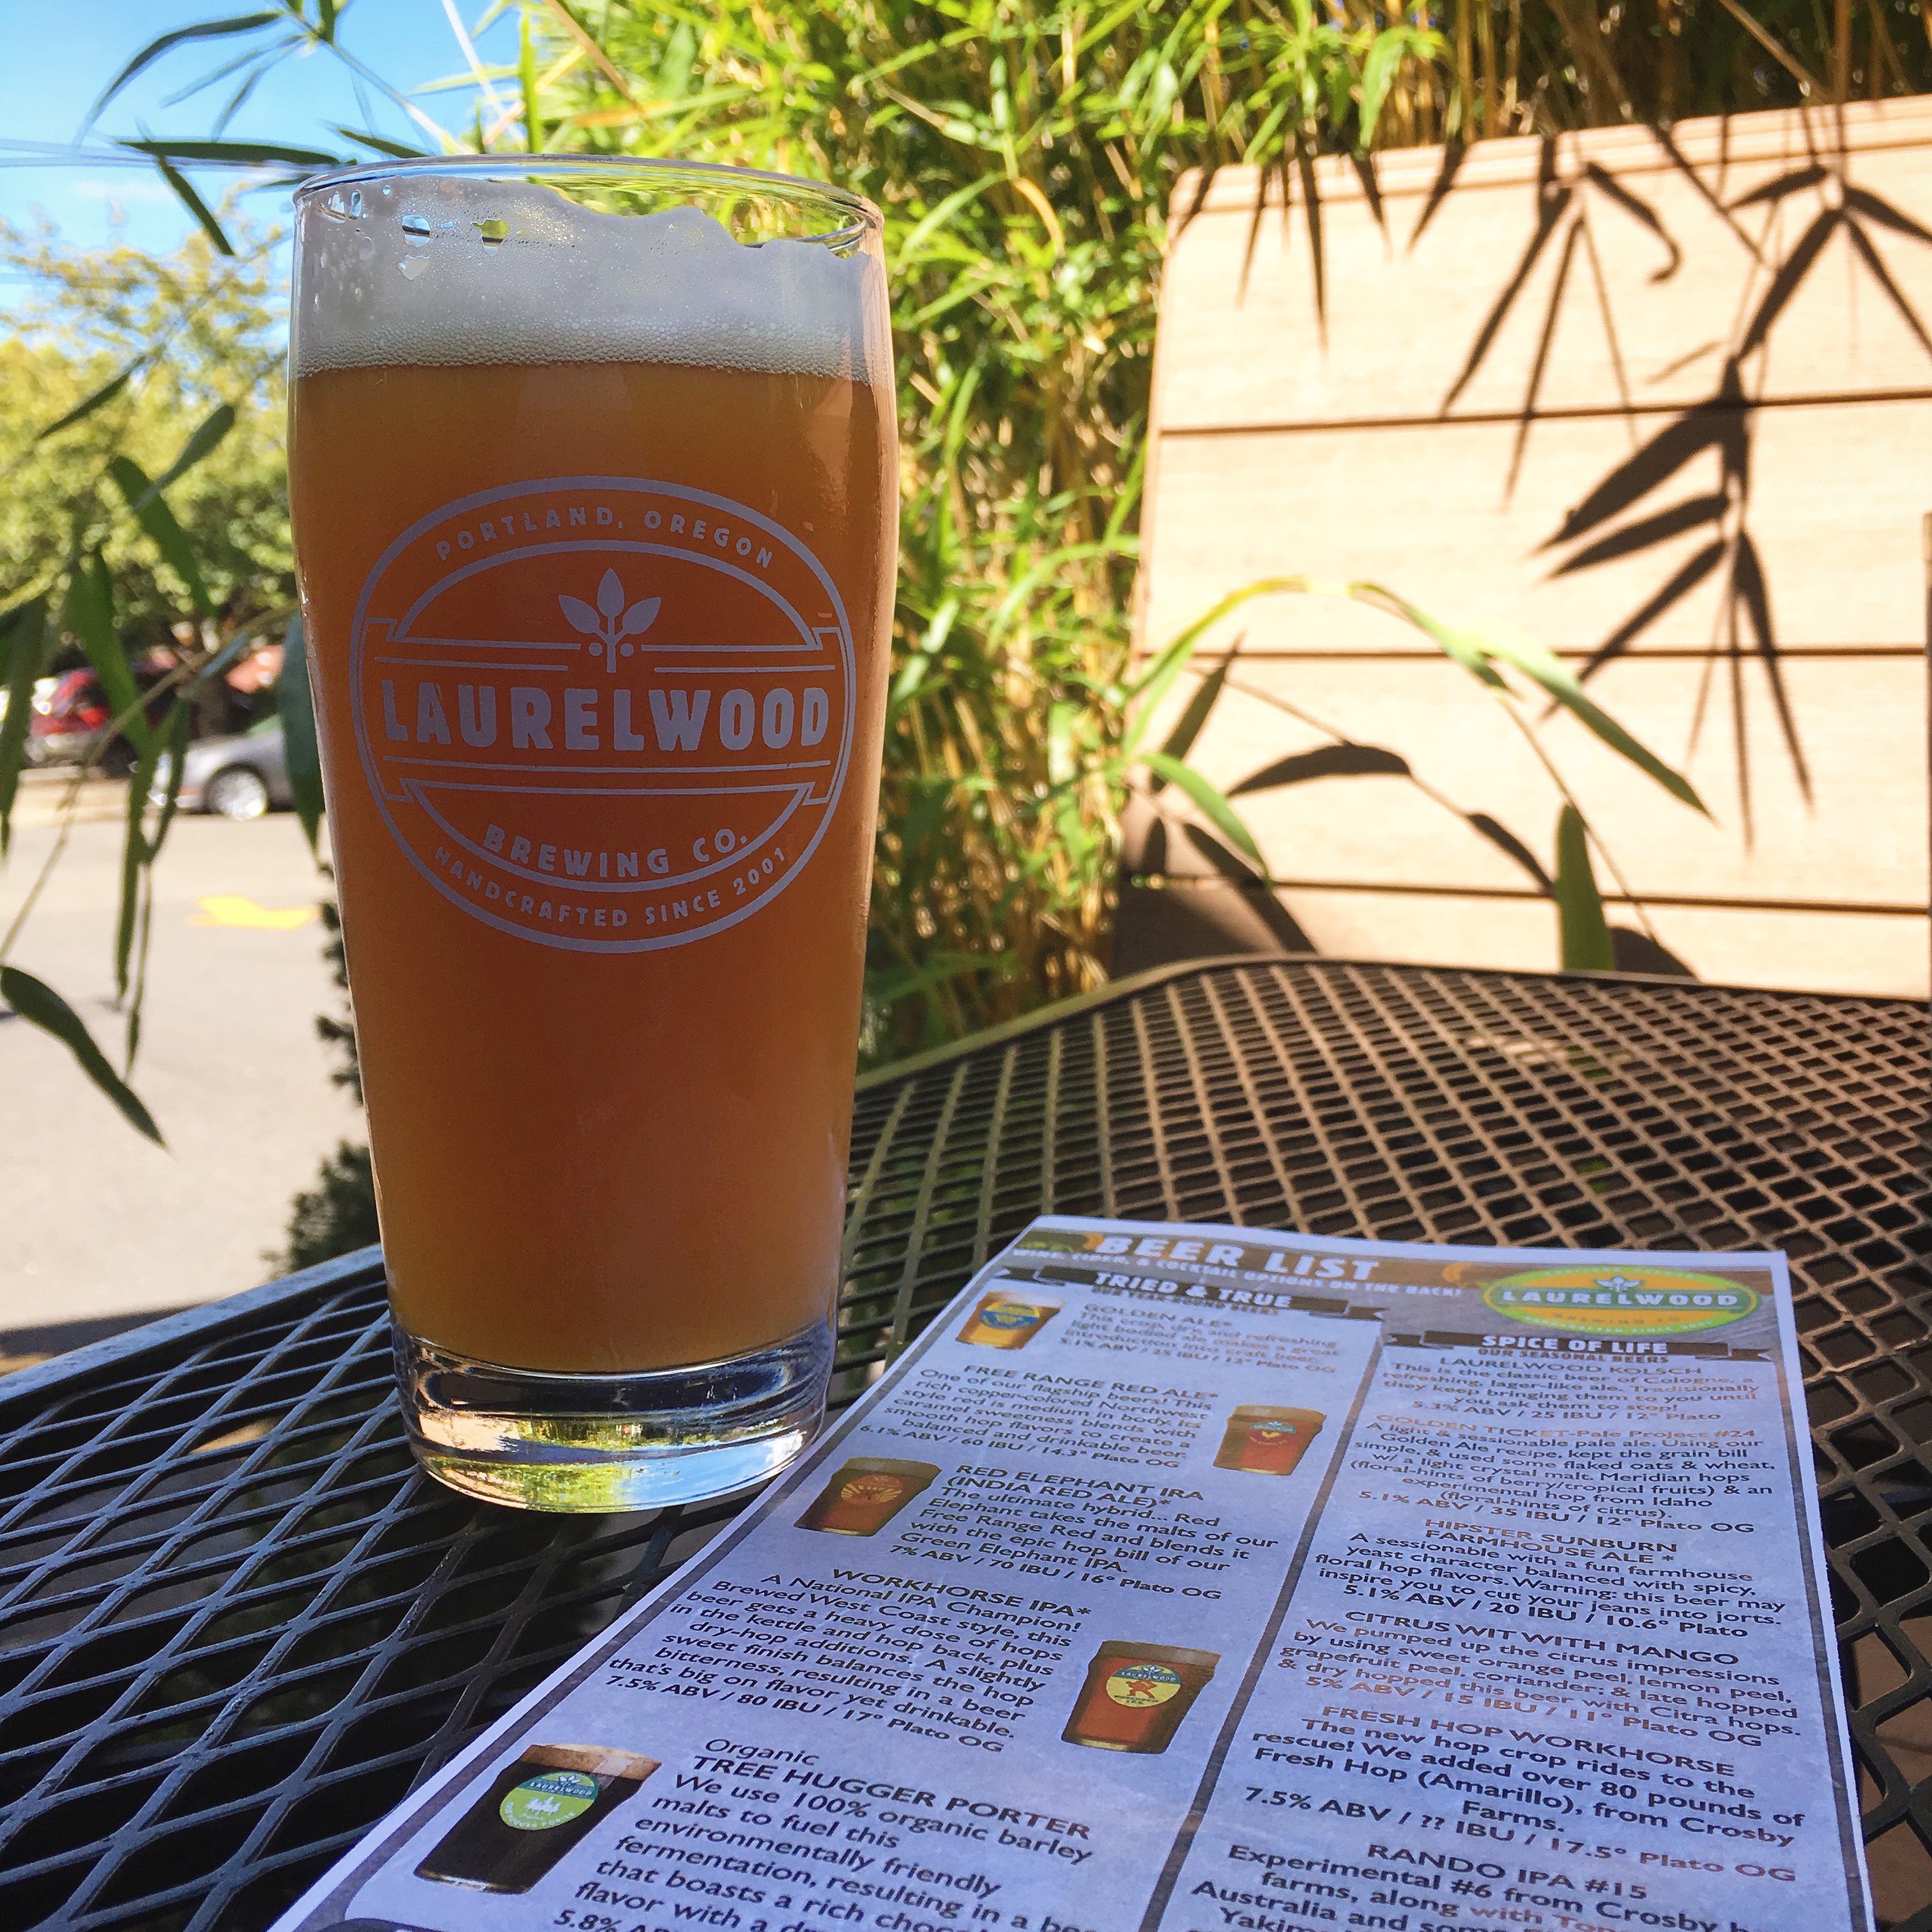 A pint of 2016 Fresh Hop Workhorse IPA from Laurelwood Brewing.